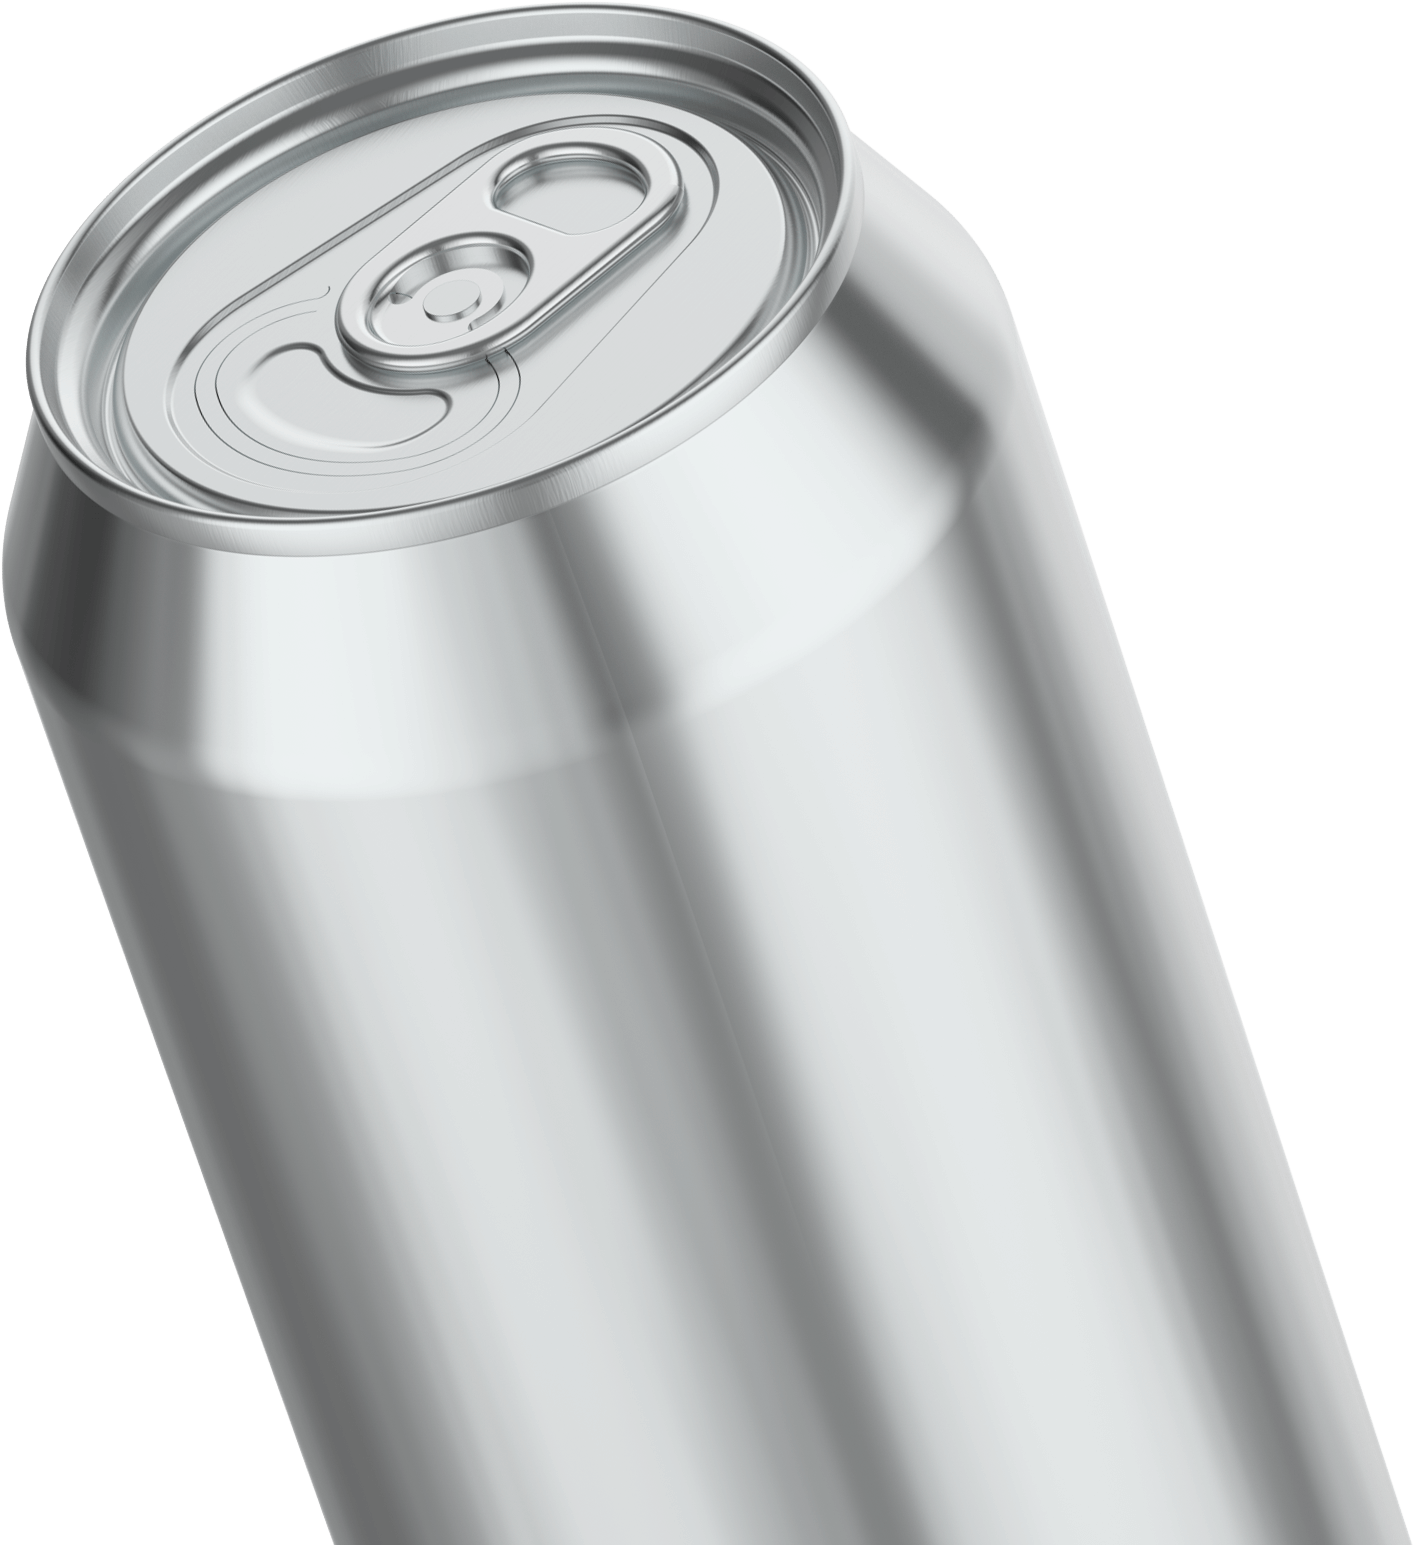 An aluminum can at an angle, with the edge and top visible